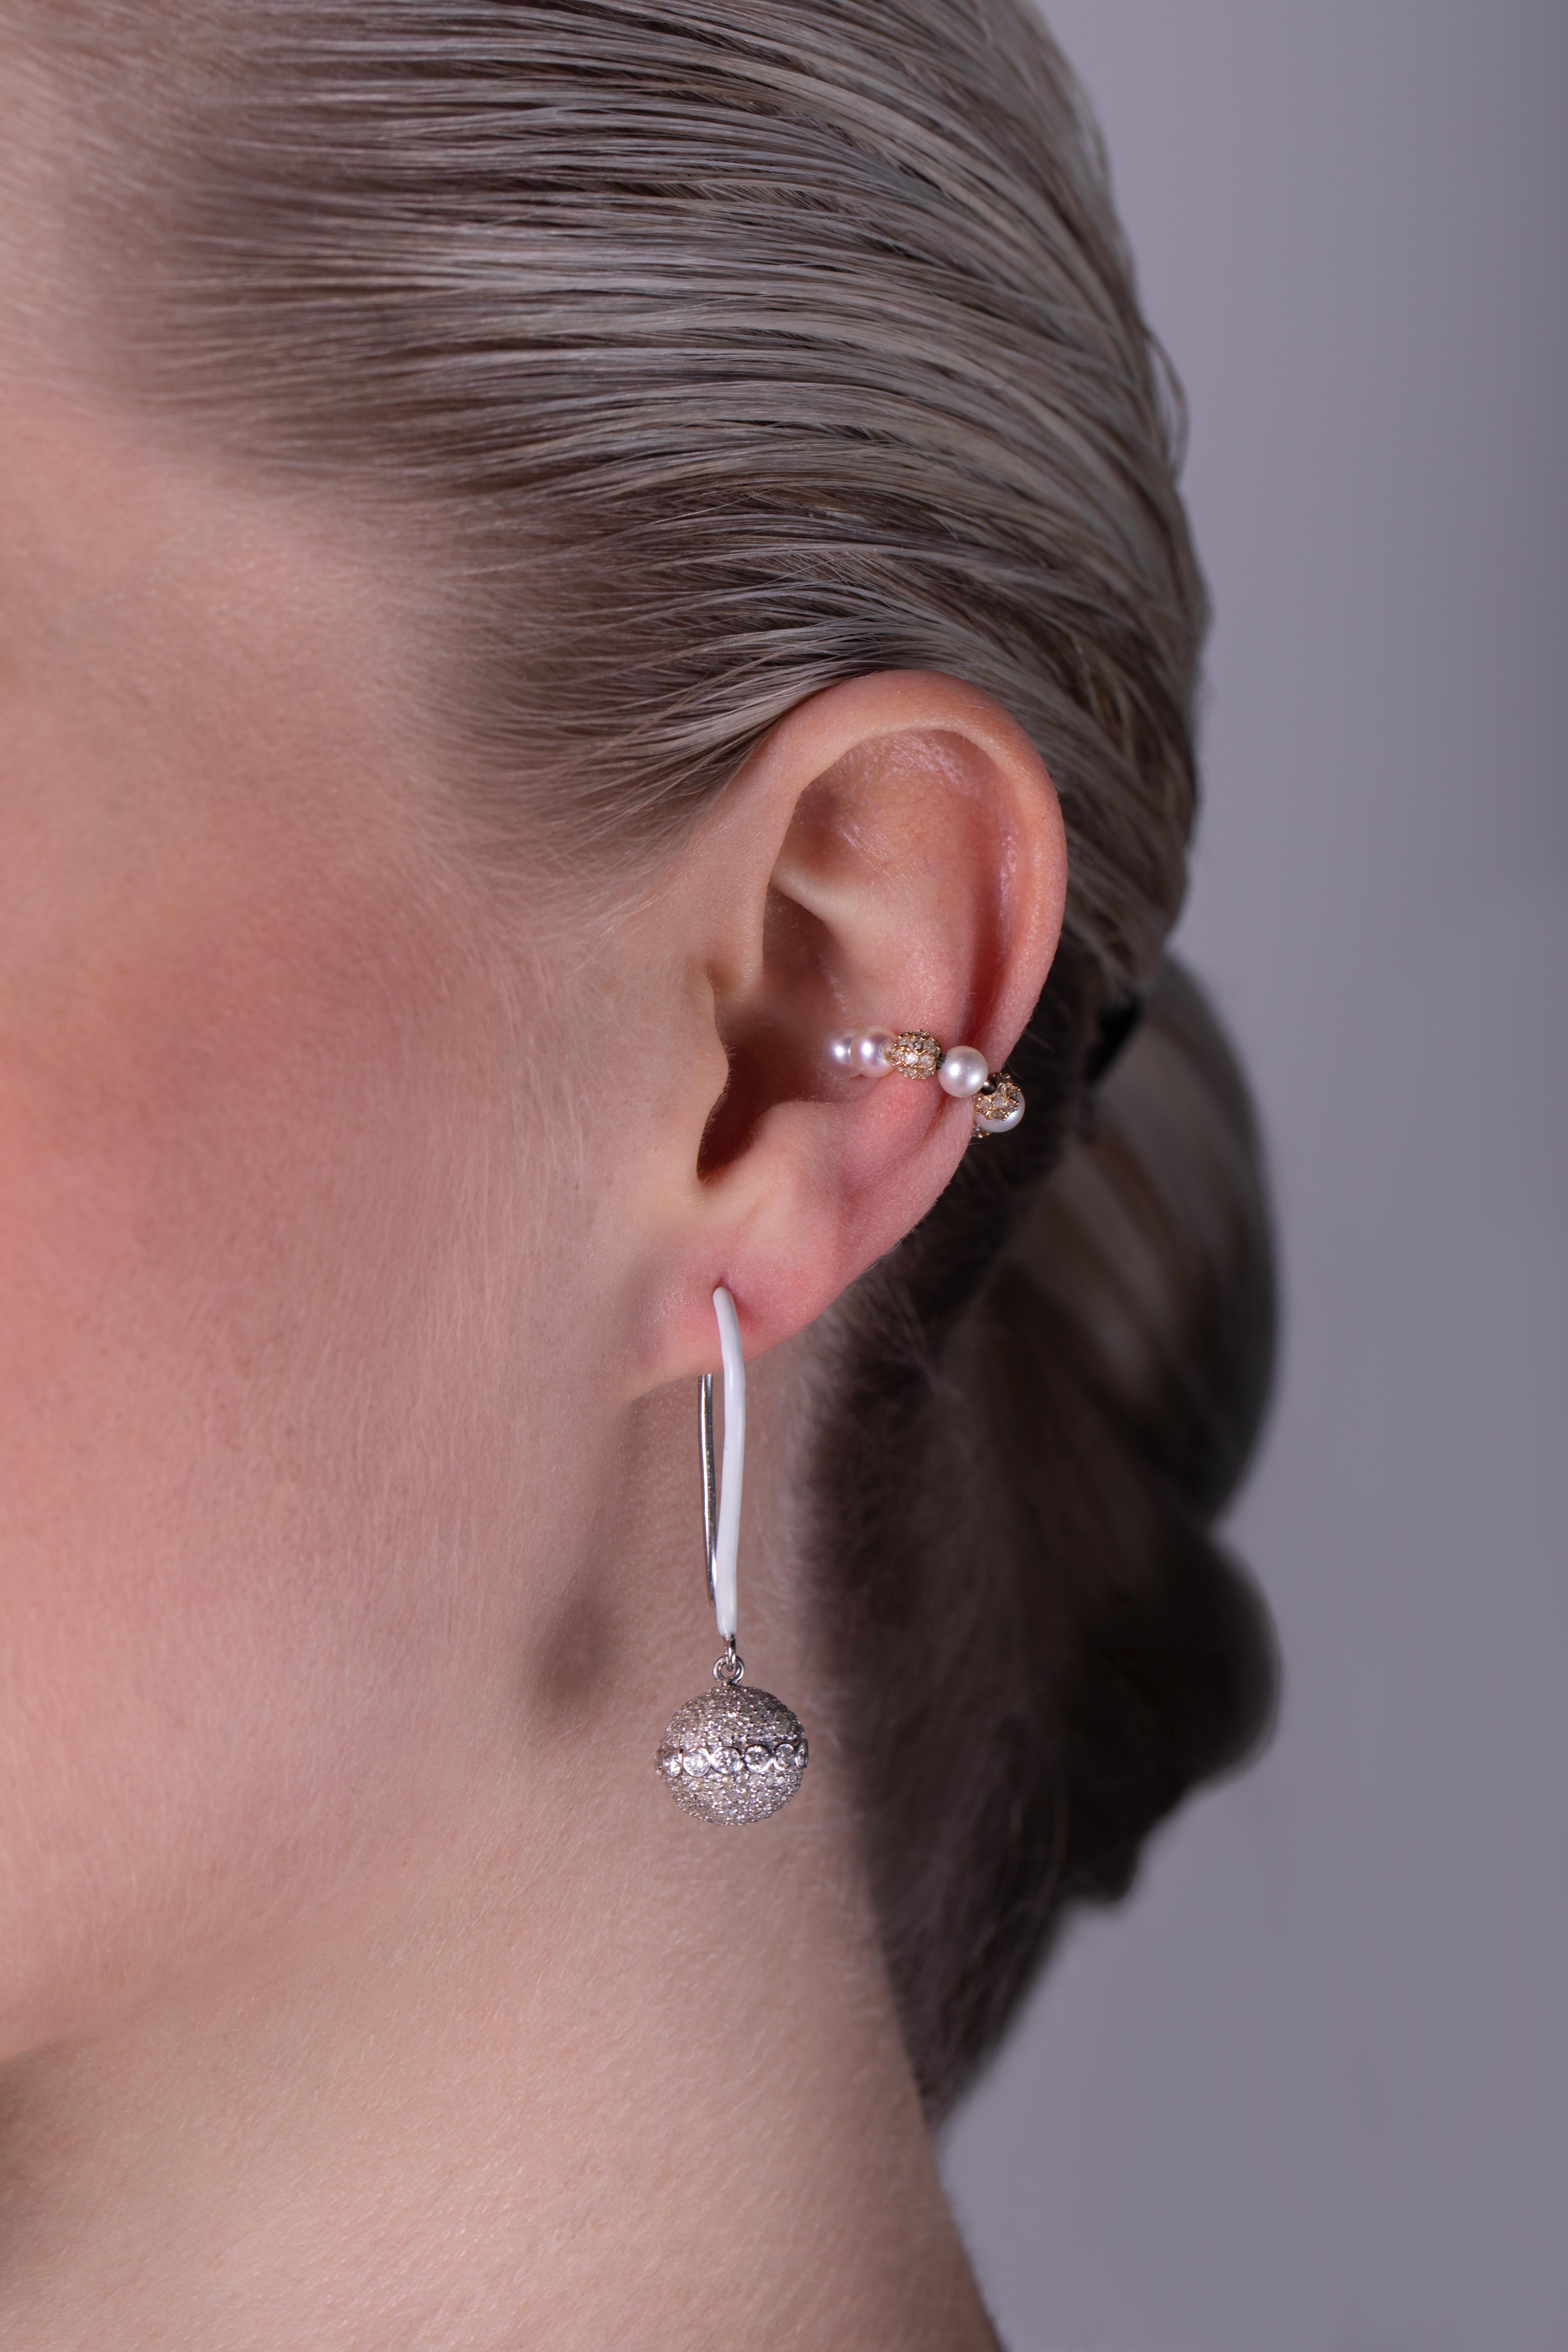 Brilliant Cut 18k White Gold Earrings with Diamond-Encrusted Orbs and White Enamel